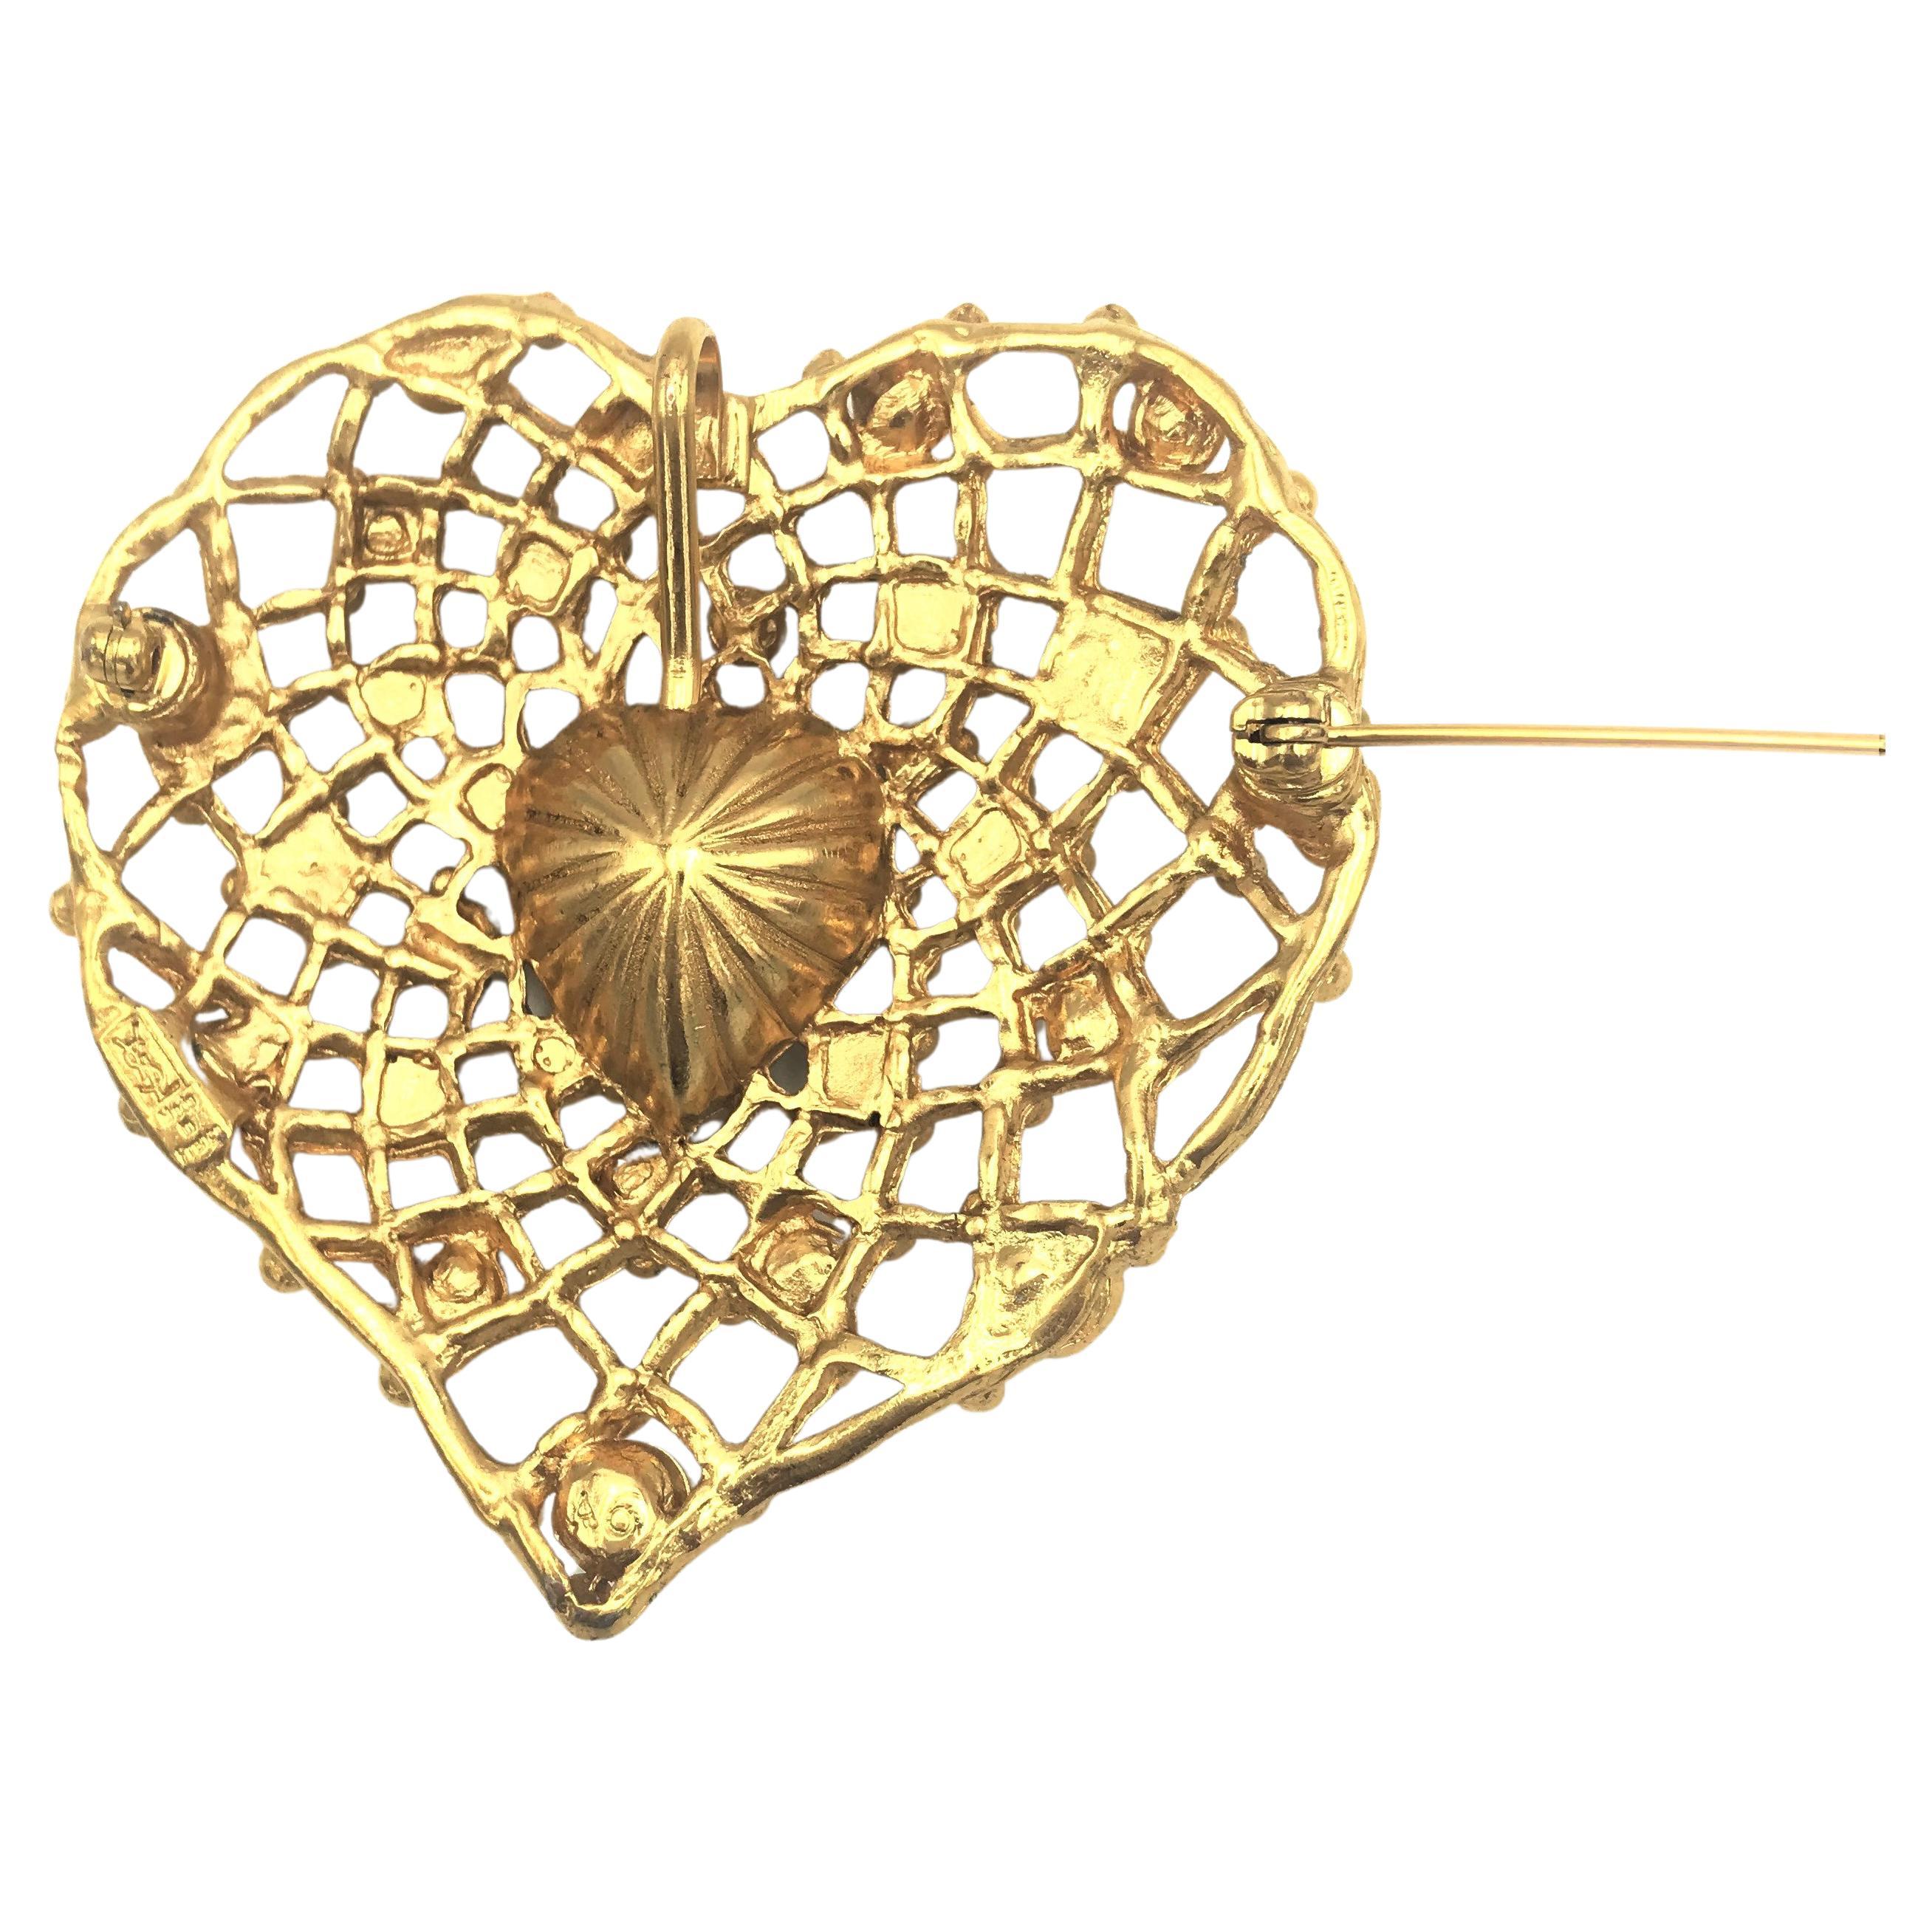 Heart Cut Yves St. Laurent Paris heart brooch with rhinestones gold plated 1980/90s